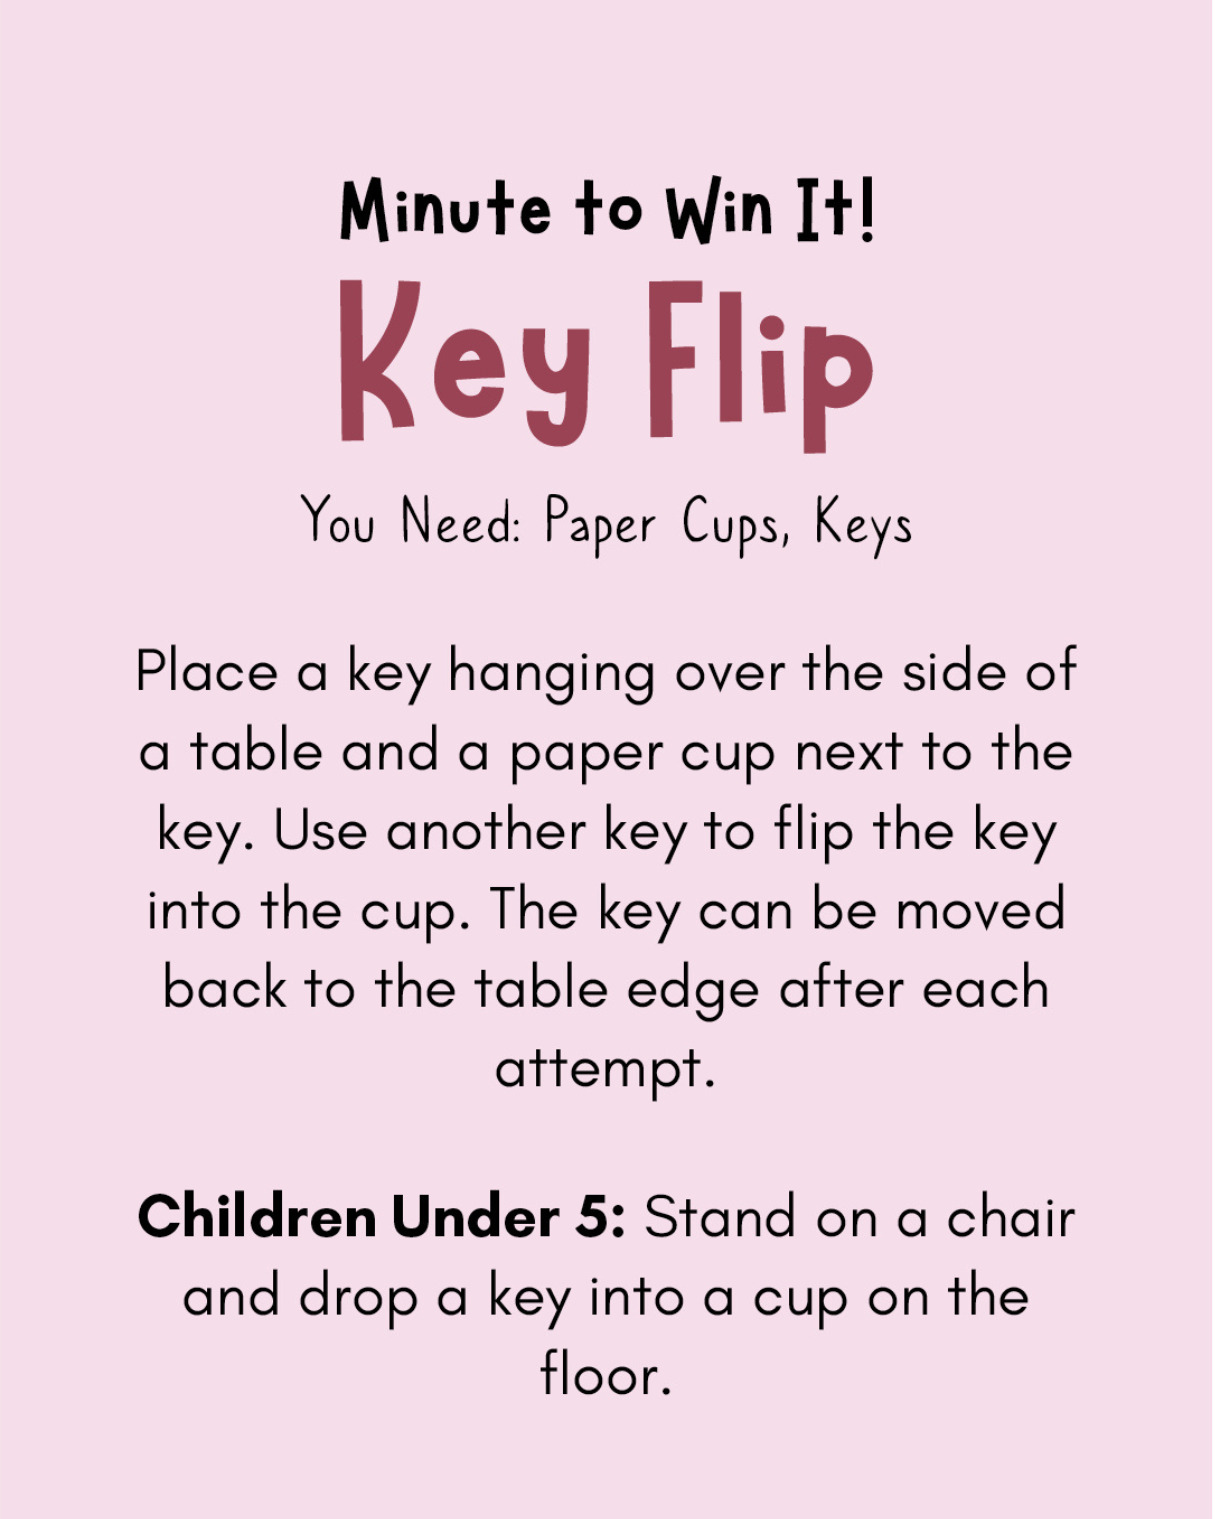 Minute to Win It Games for Families: Key Flip